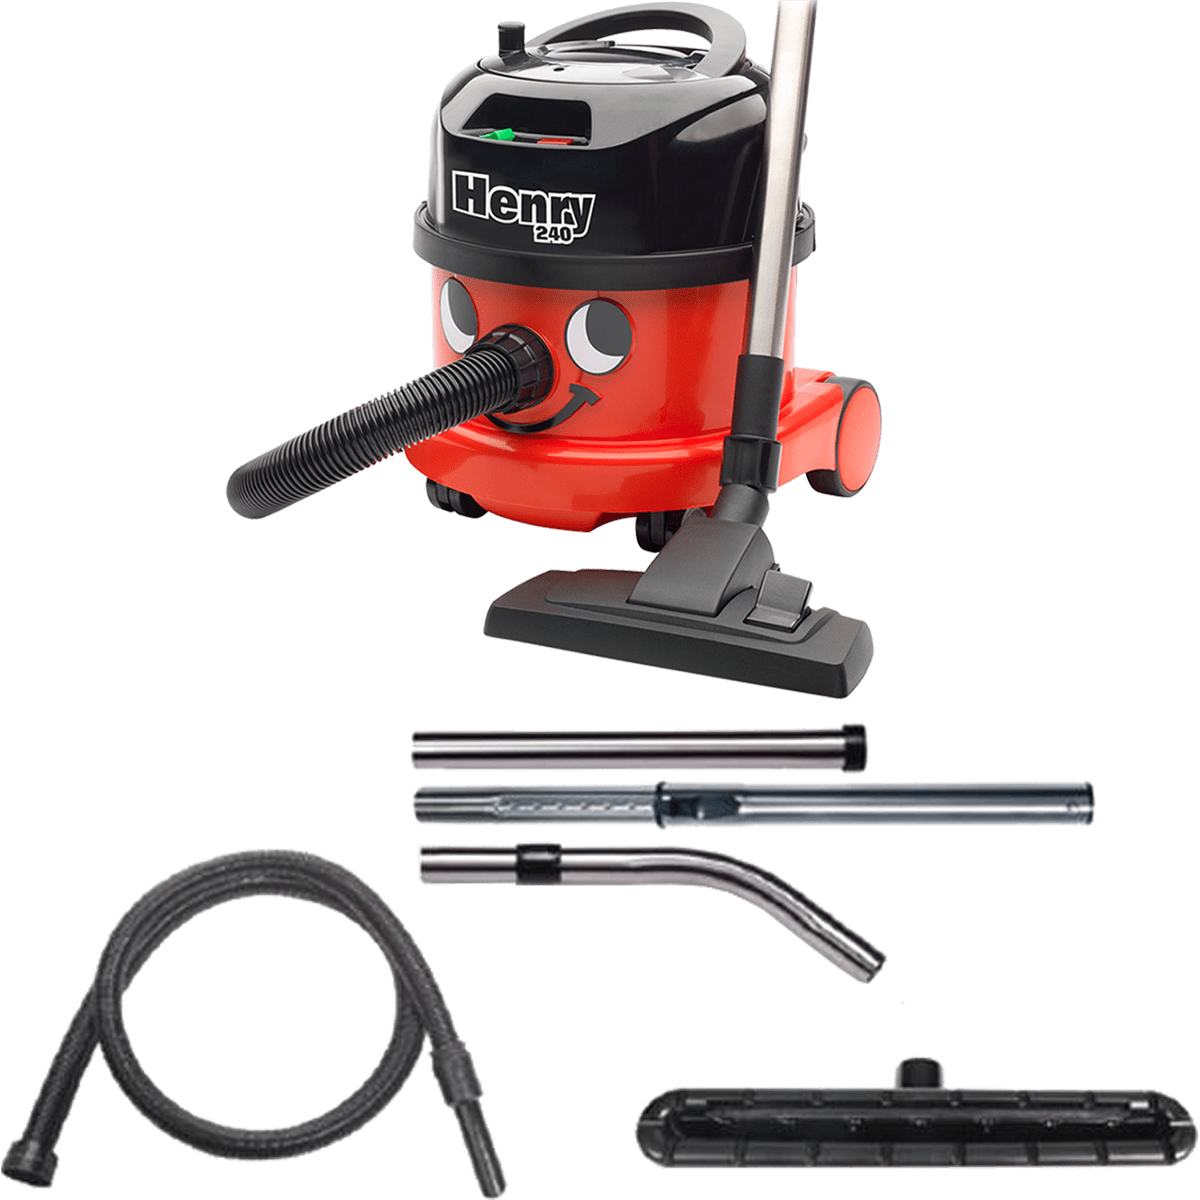 NaceCare PPR 240 with Productivity Kit - AST4 Canister Vacuum Cleaner